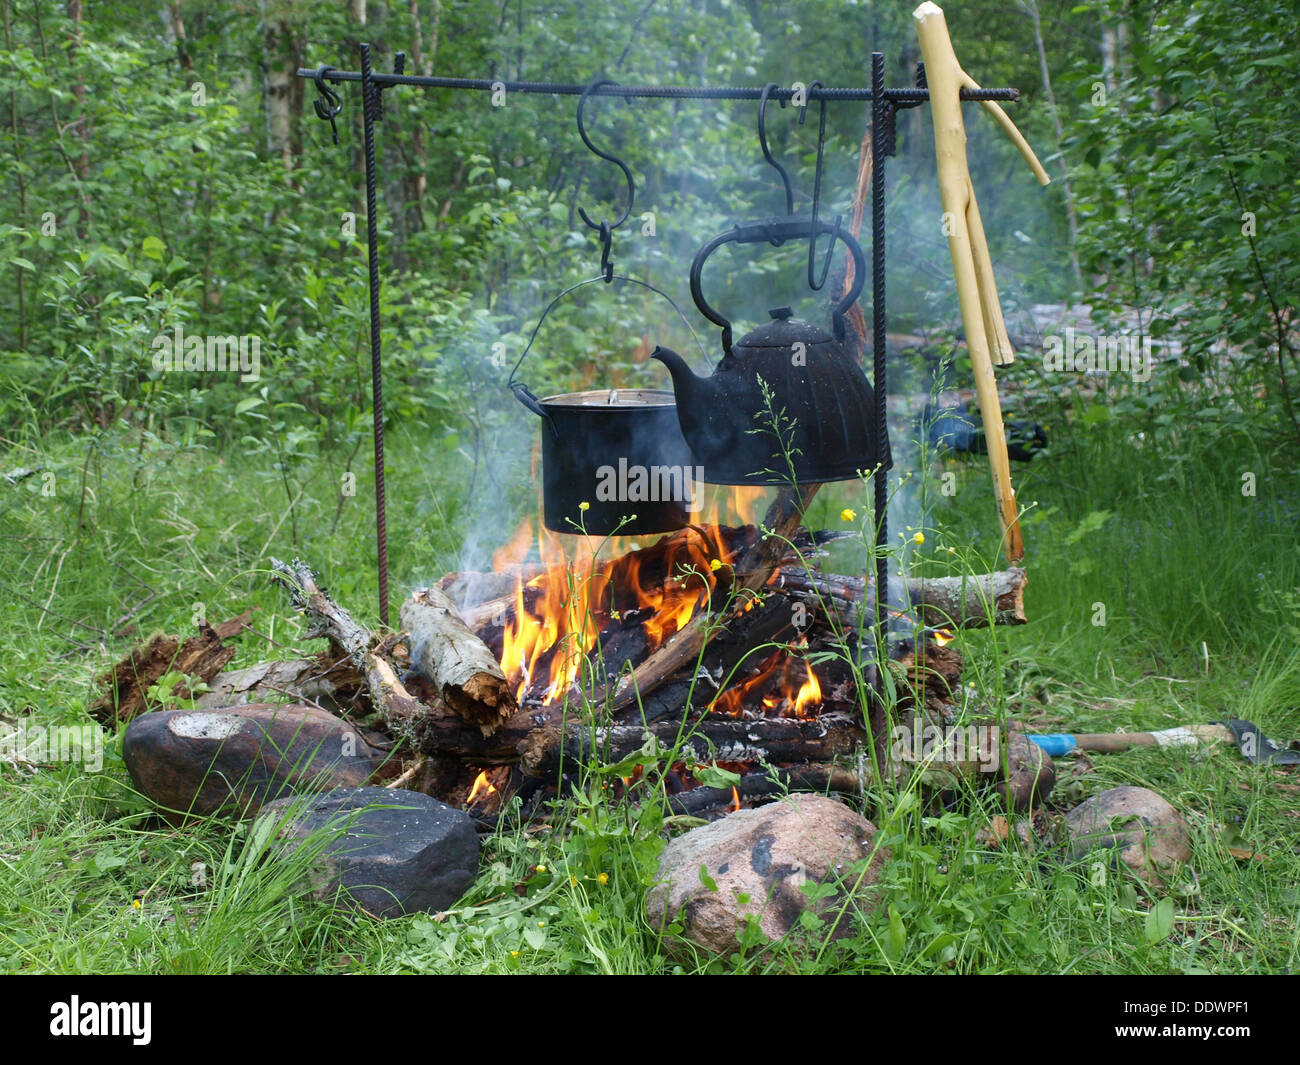 https://c8.alamy.com/comp/DDWPF1/teapot-and-kettle-on-a-fire-in-the-summer-DDWPF1.jpg